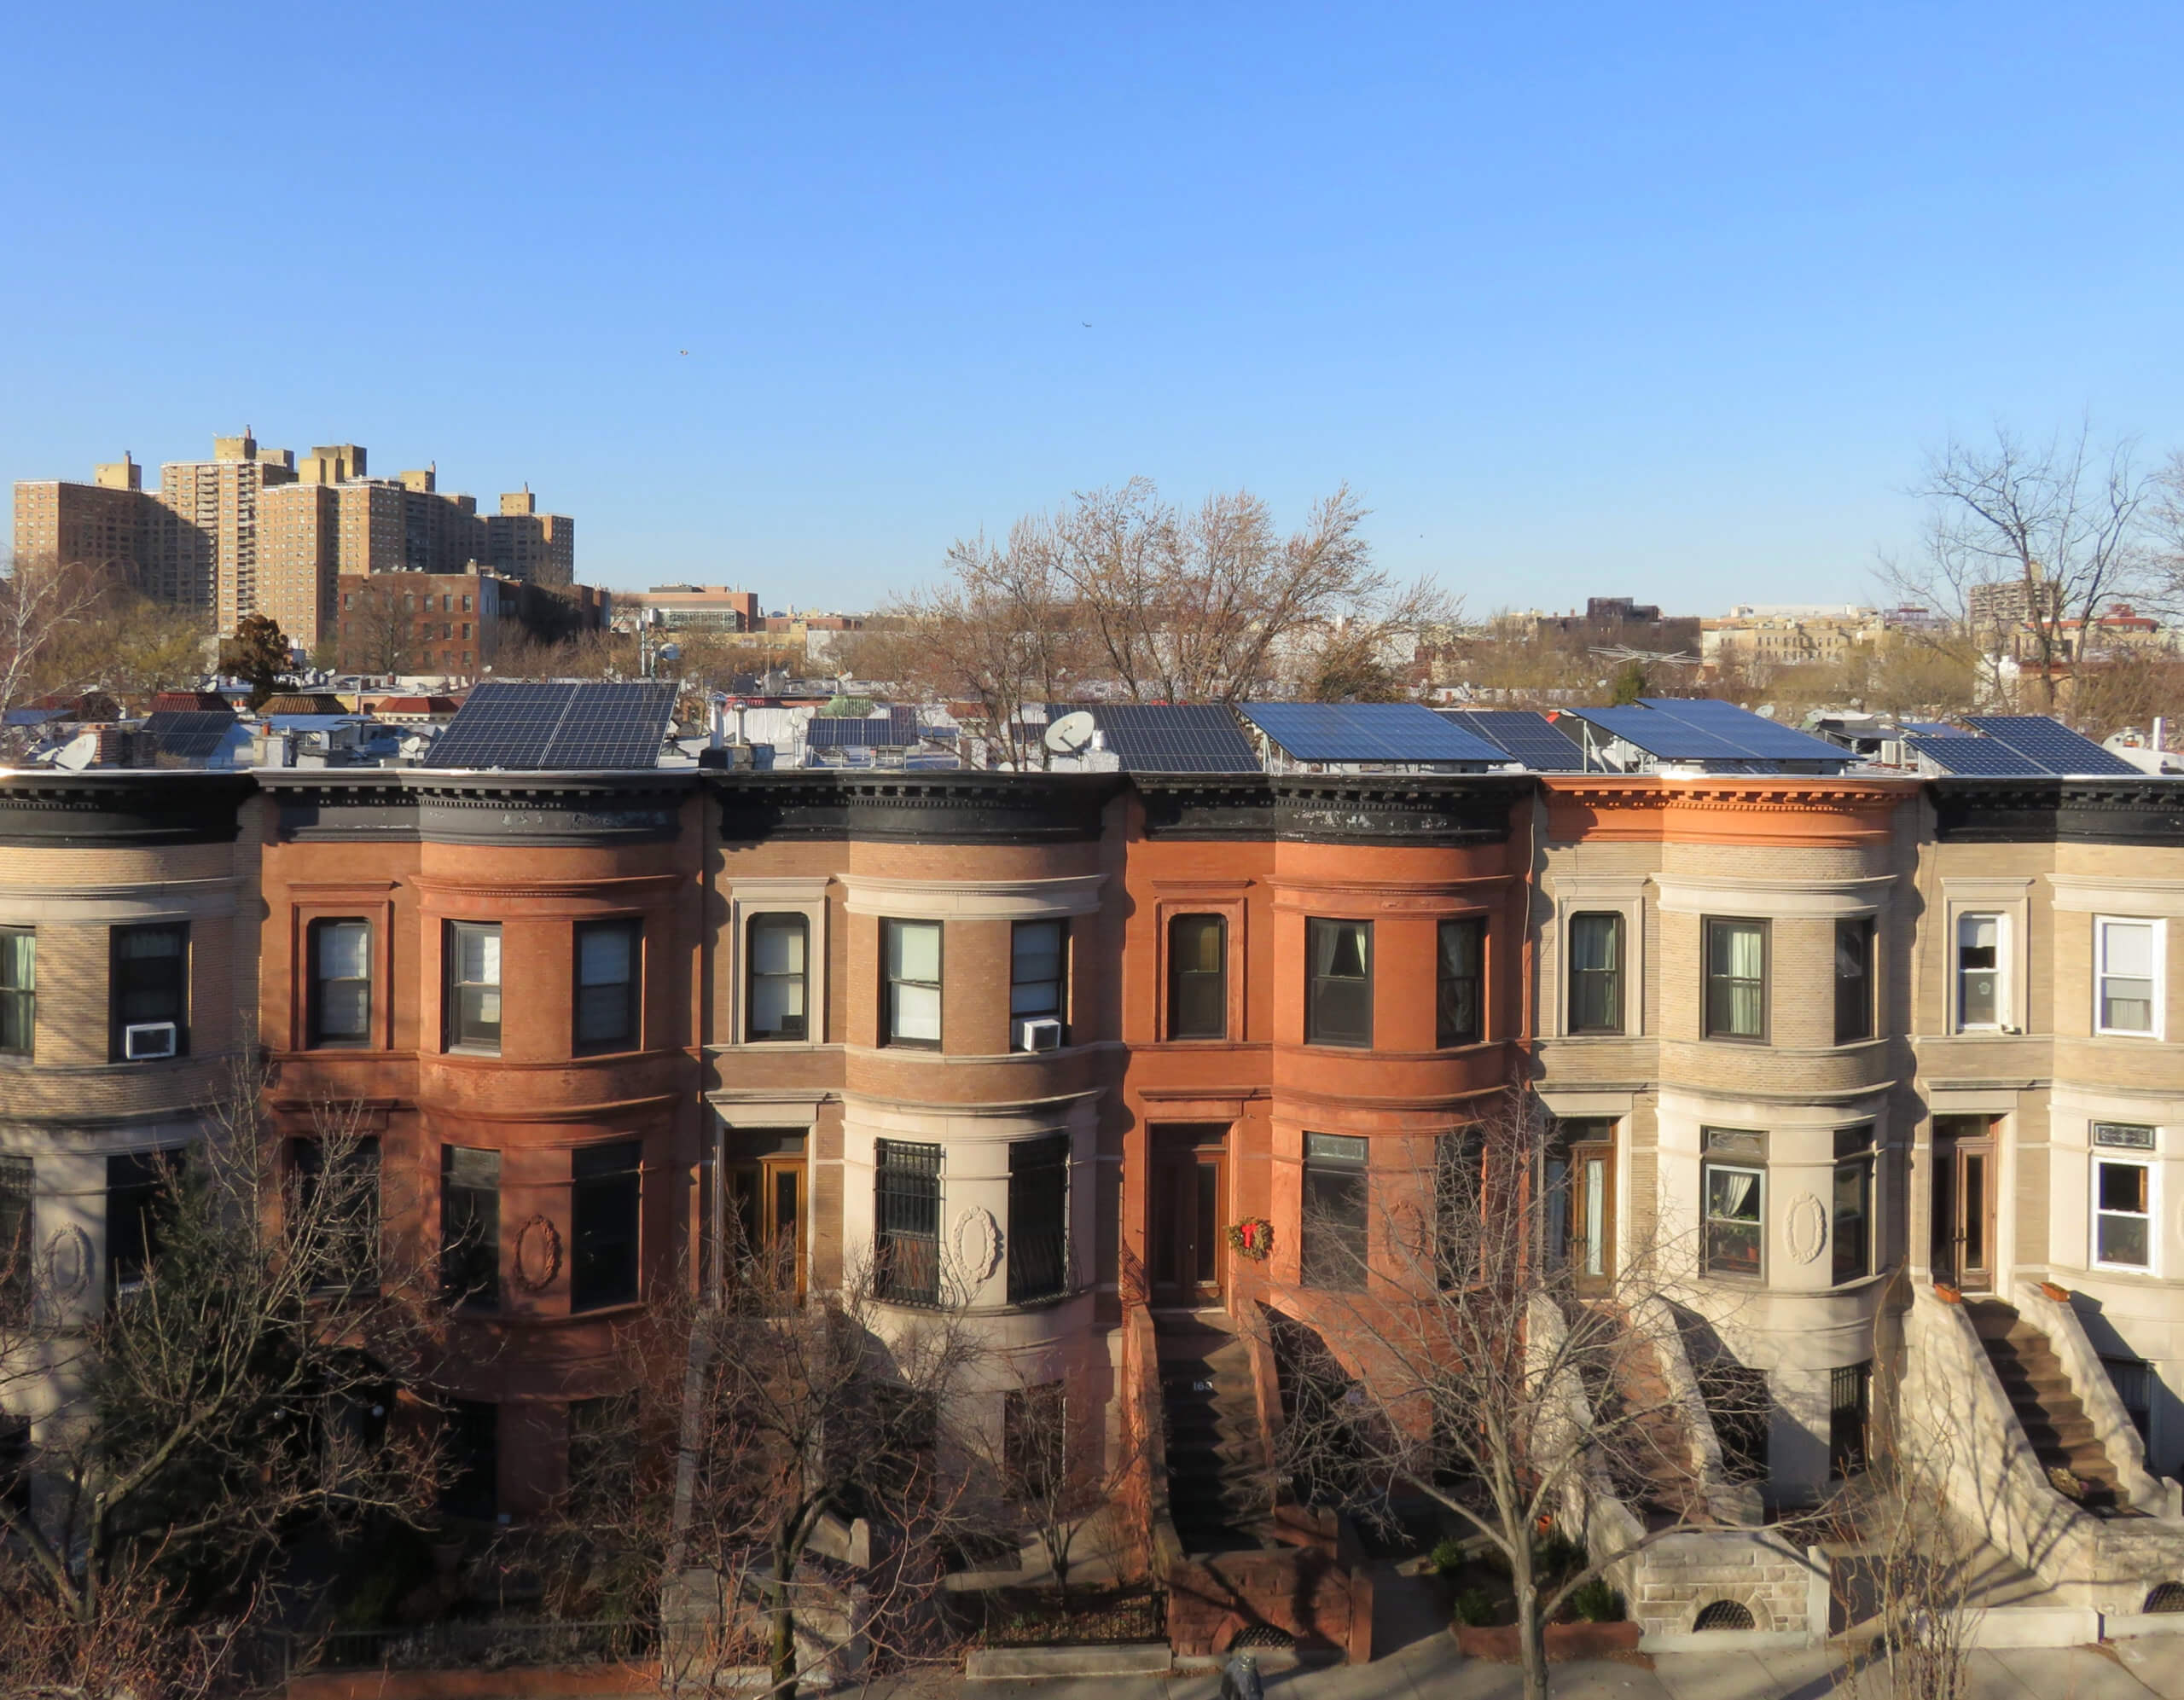 row of brownstones in Brooklyn with solar panels